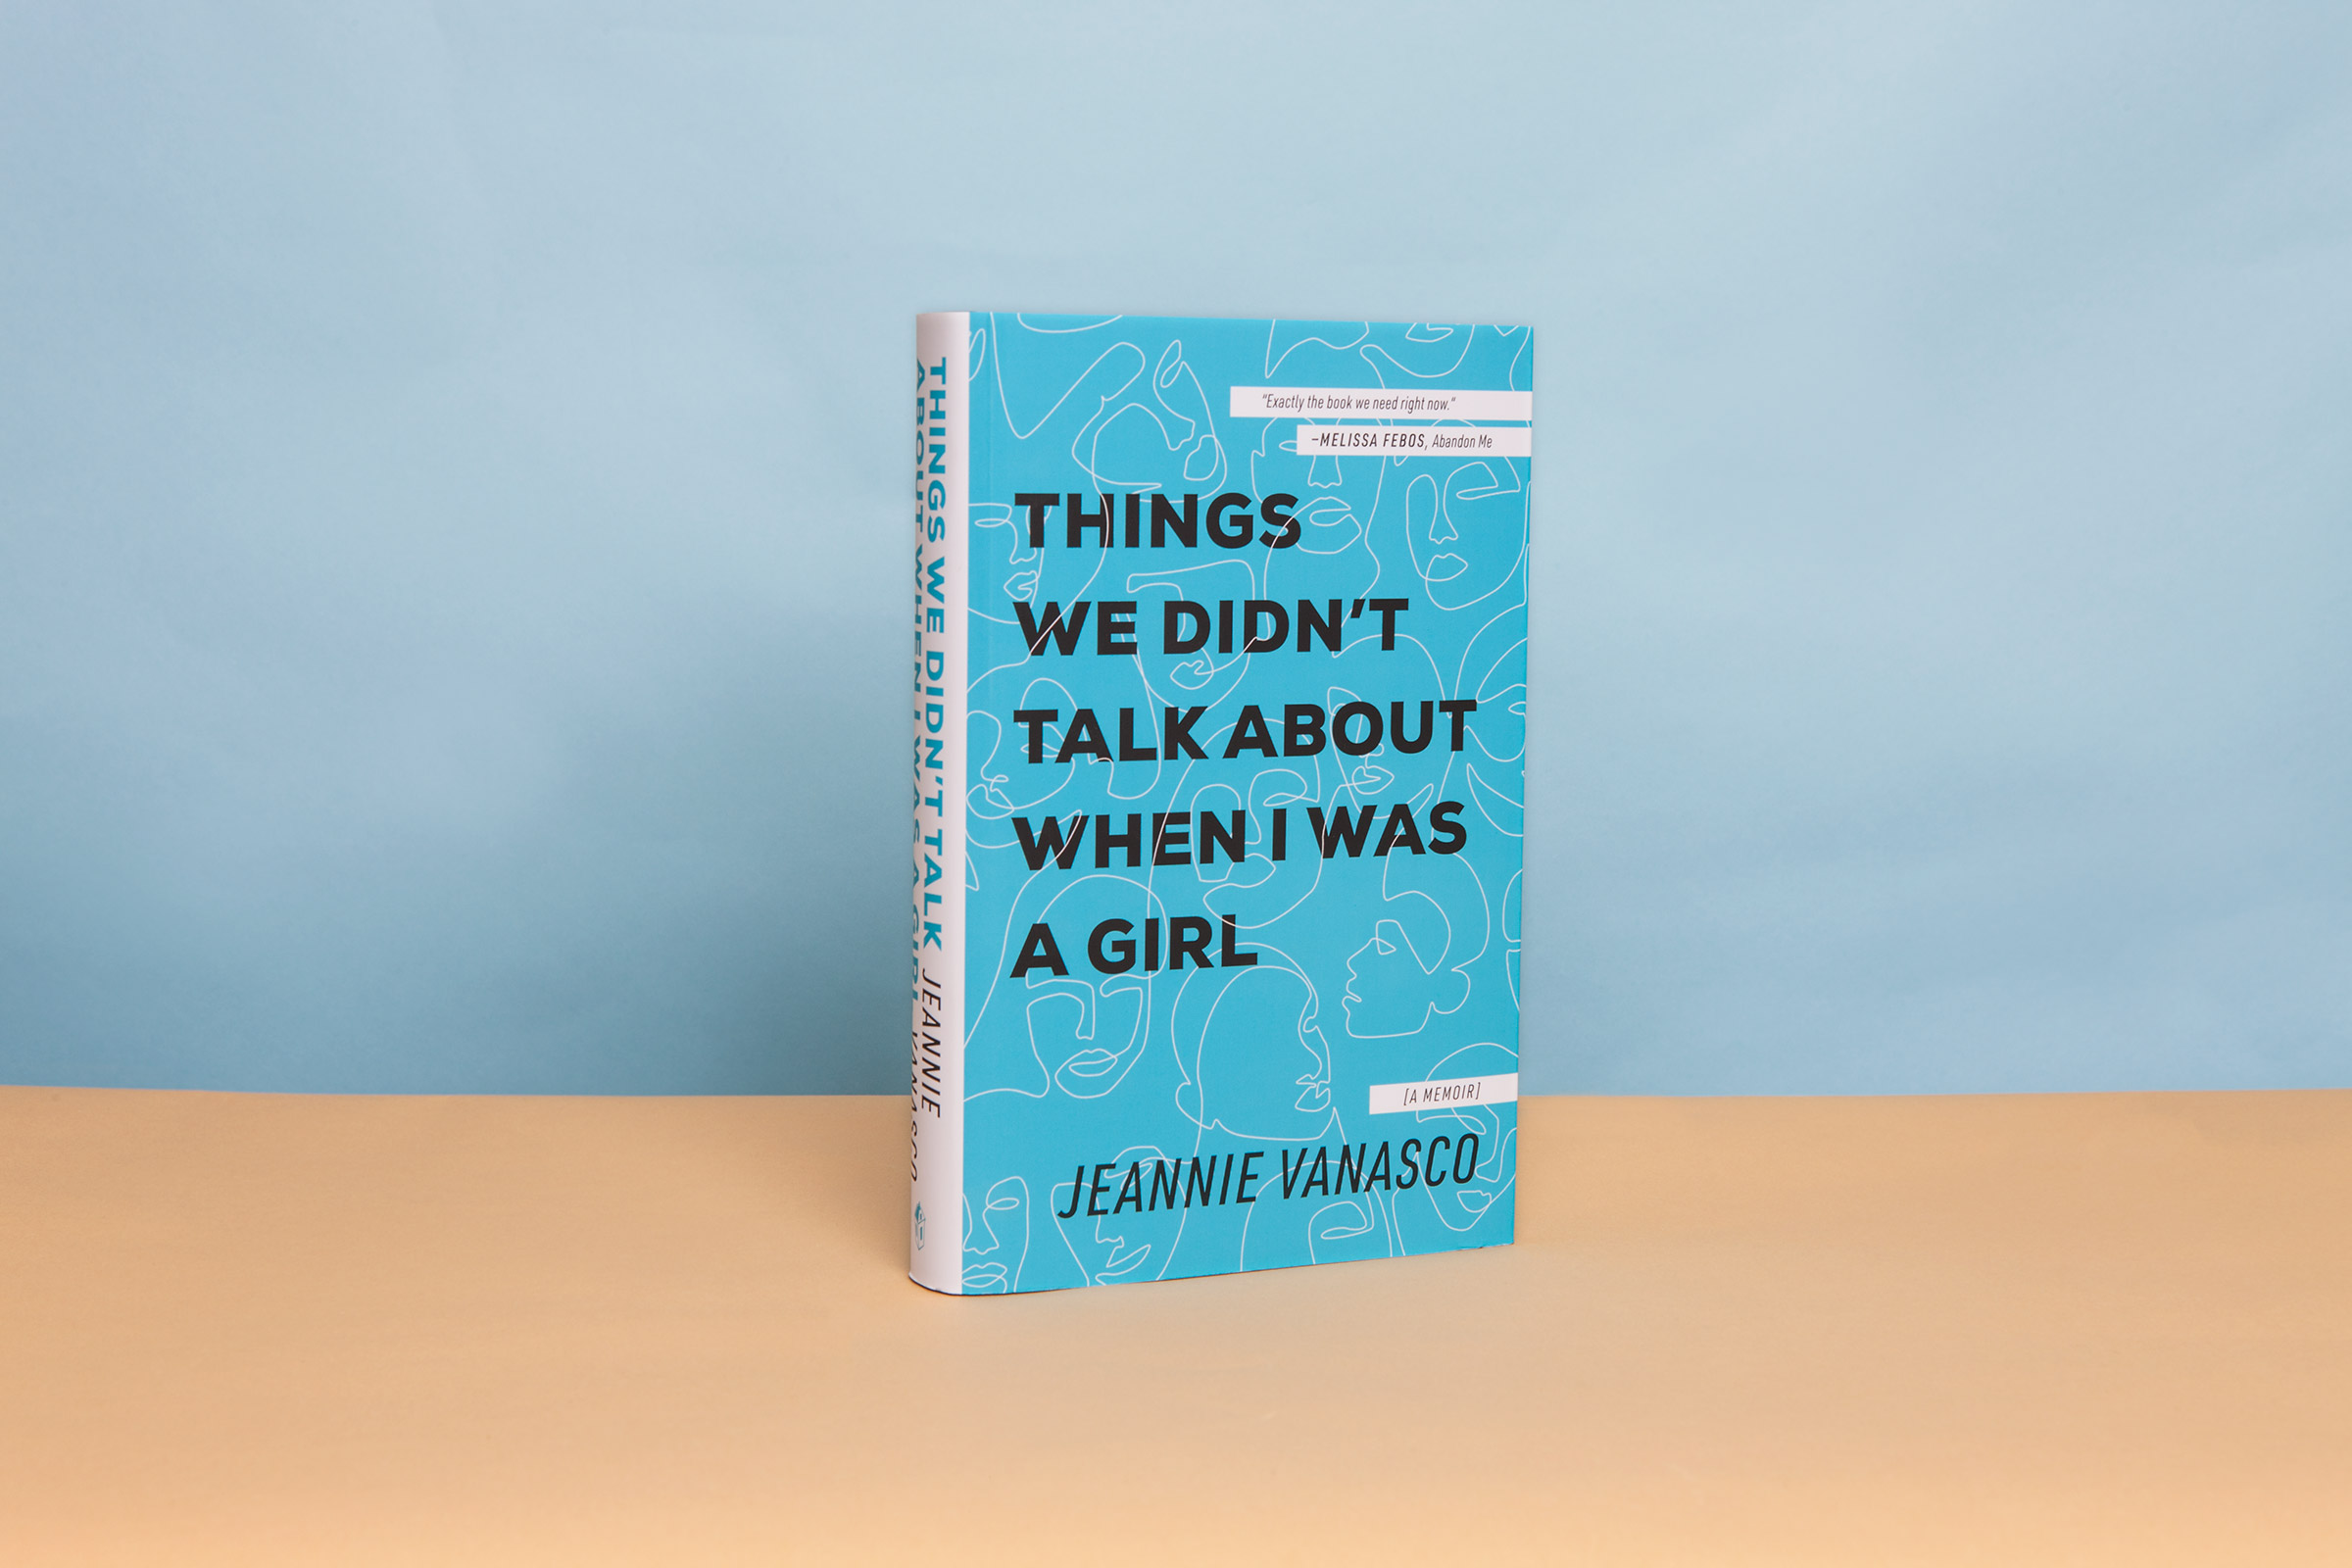 Things-We-Didn’t-Talk-About-When-I-Was-a-Girl-review